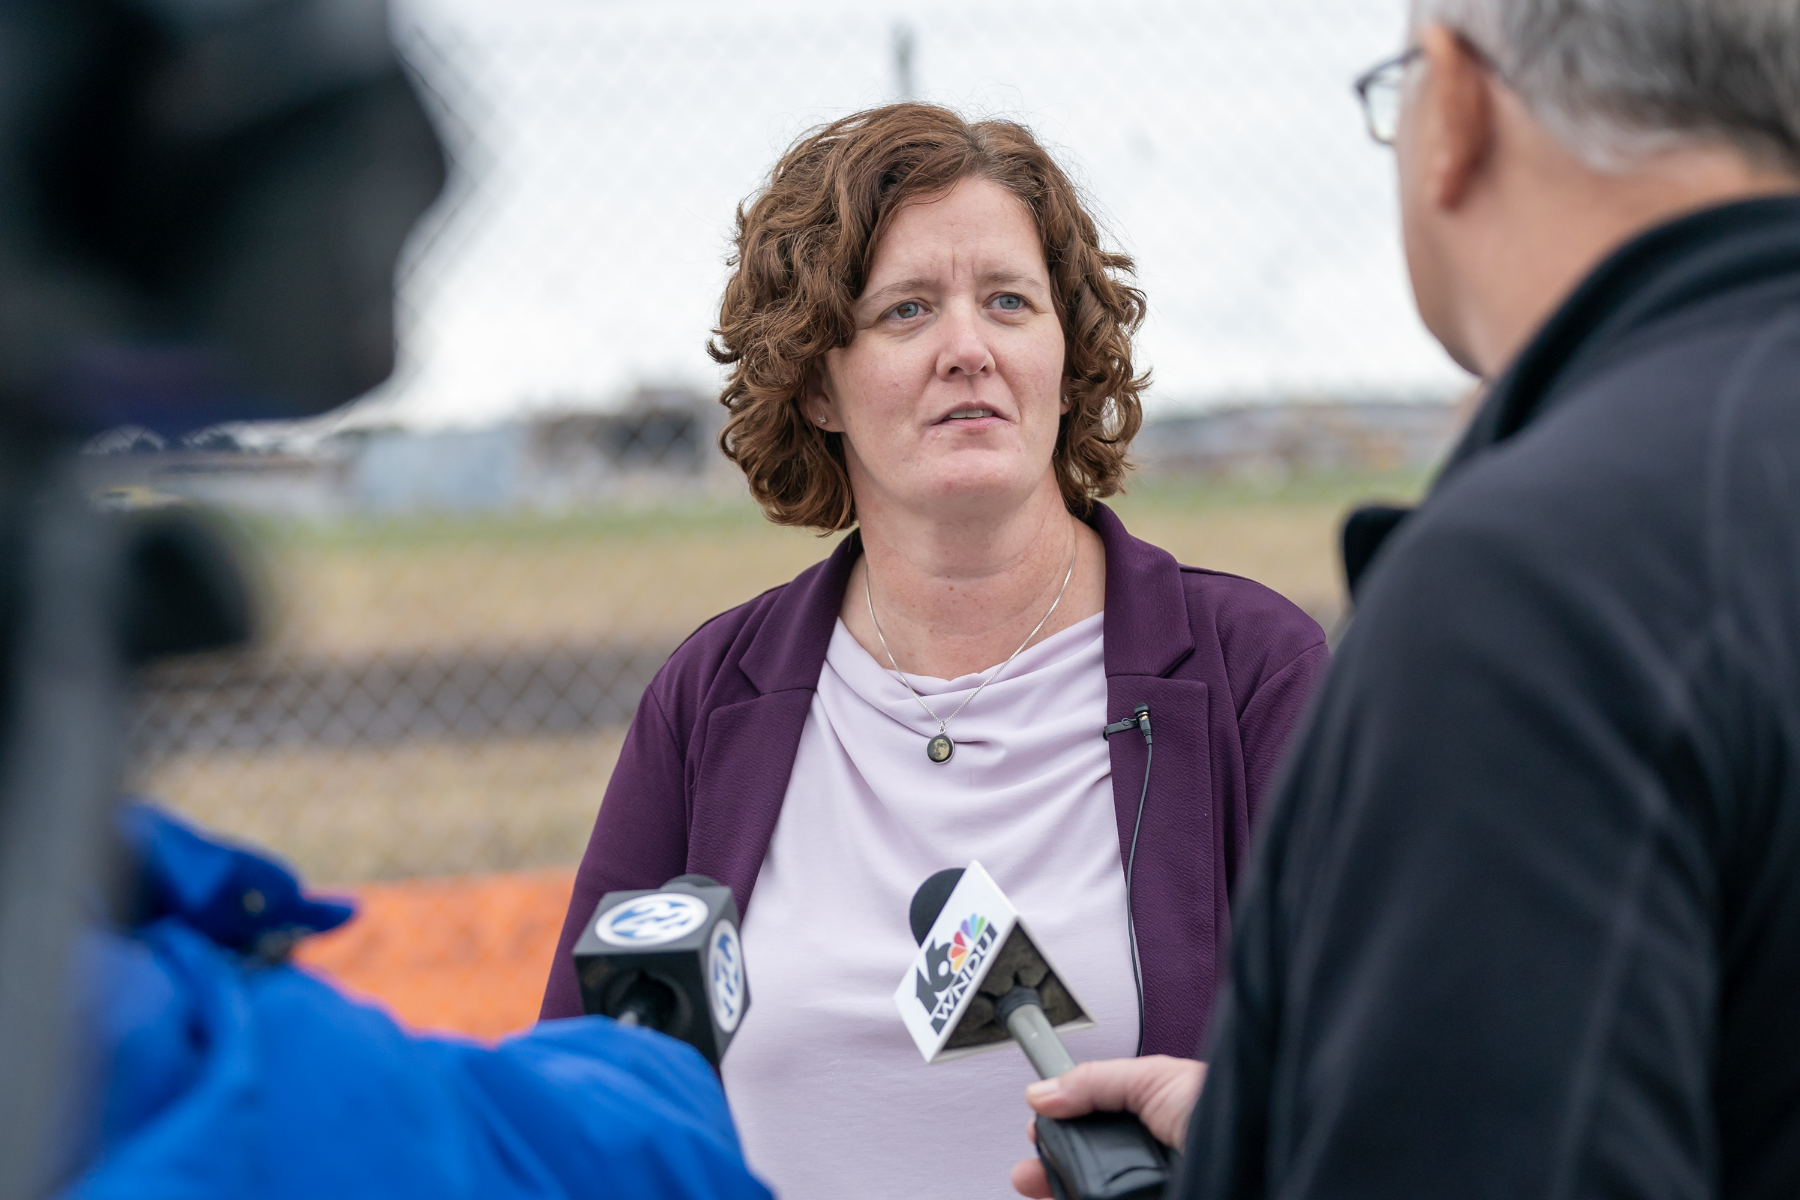 IDOC Commissioner Christina Reagle speaks to members of the media on Thursday, Sep. 28, 2023 following a groundbreaking for the new $1.2 Billion correctional facility under construction in Westville, Indiana. SCOTT ROBERSON | Indiana Department of Correction